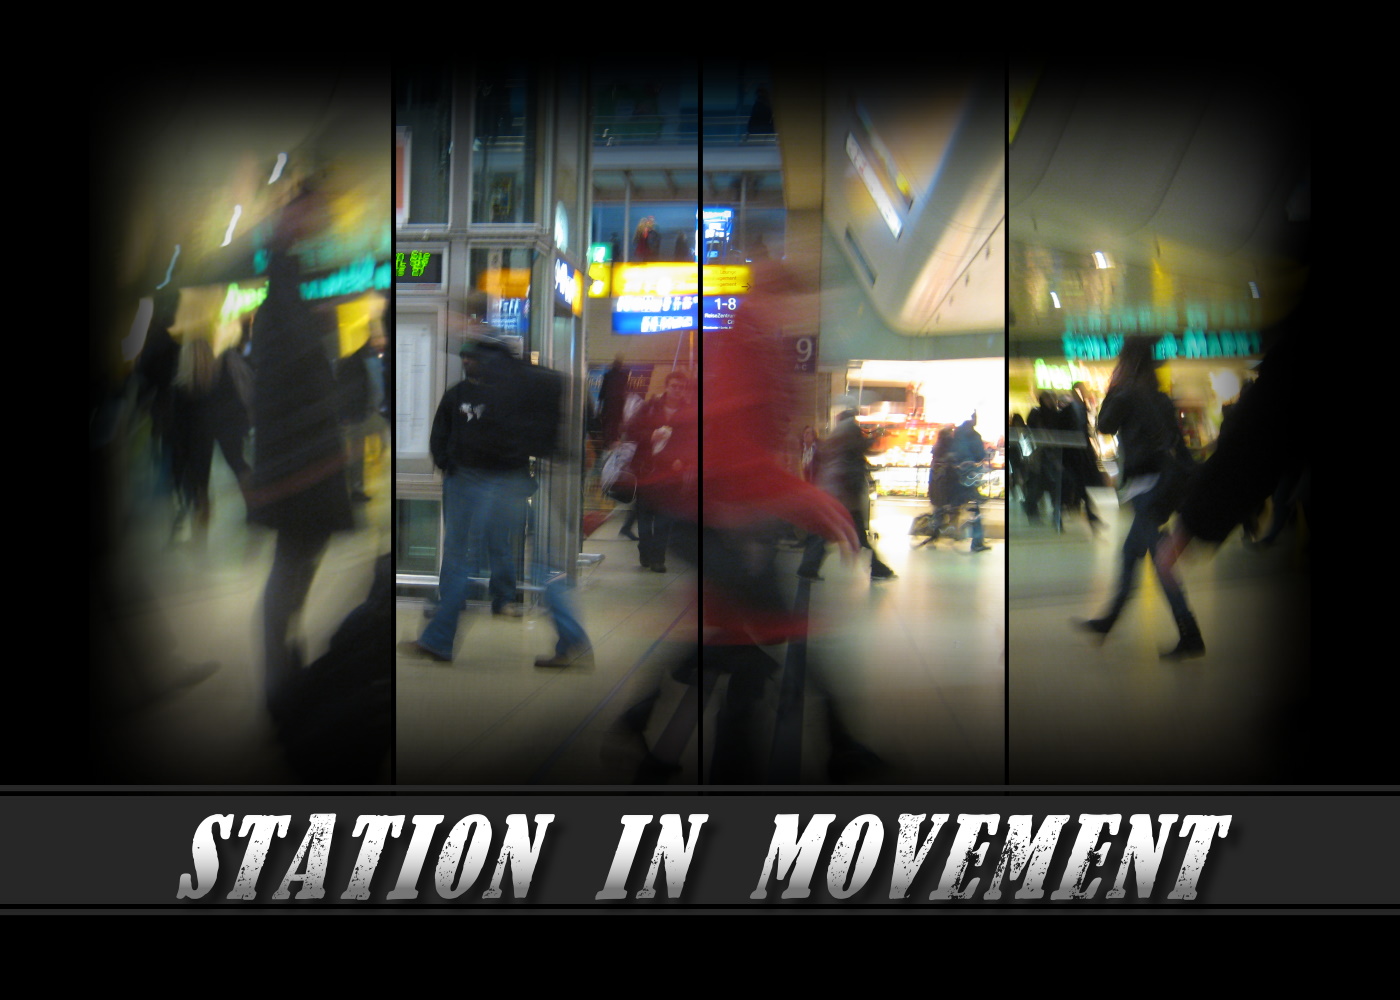 Station in Movement